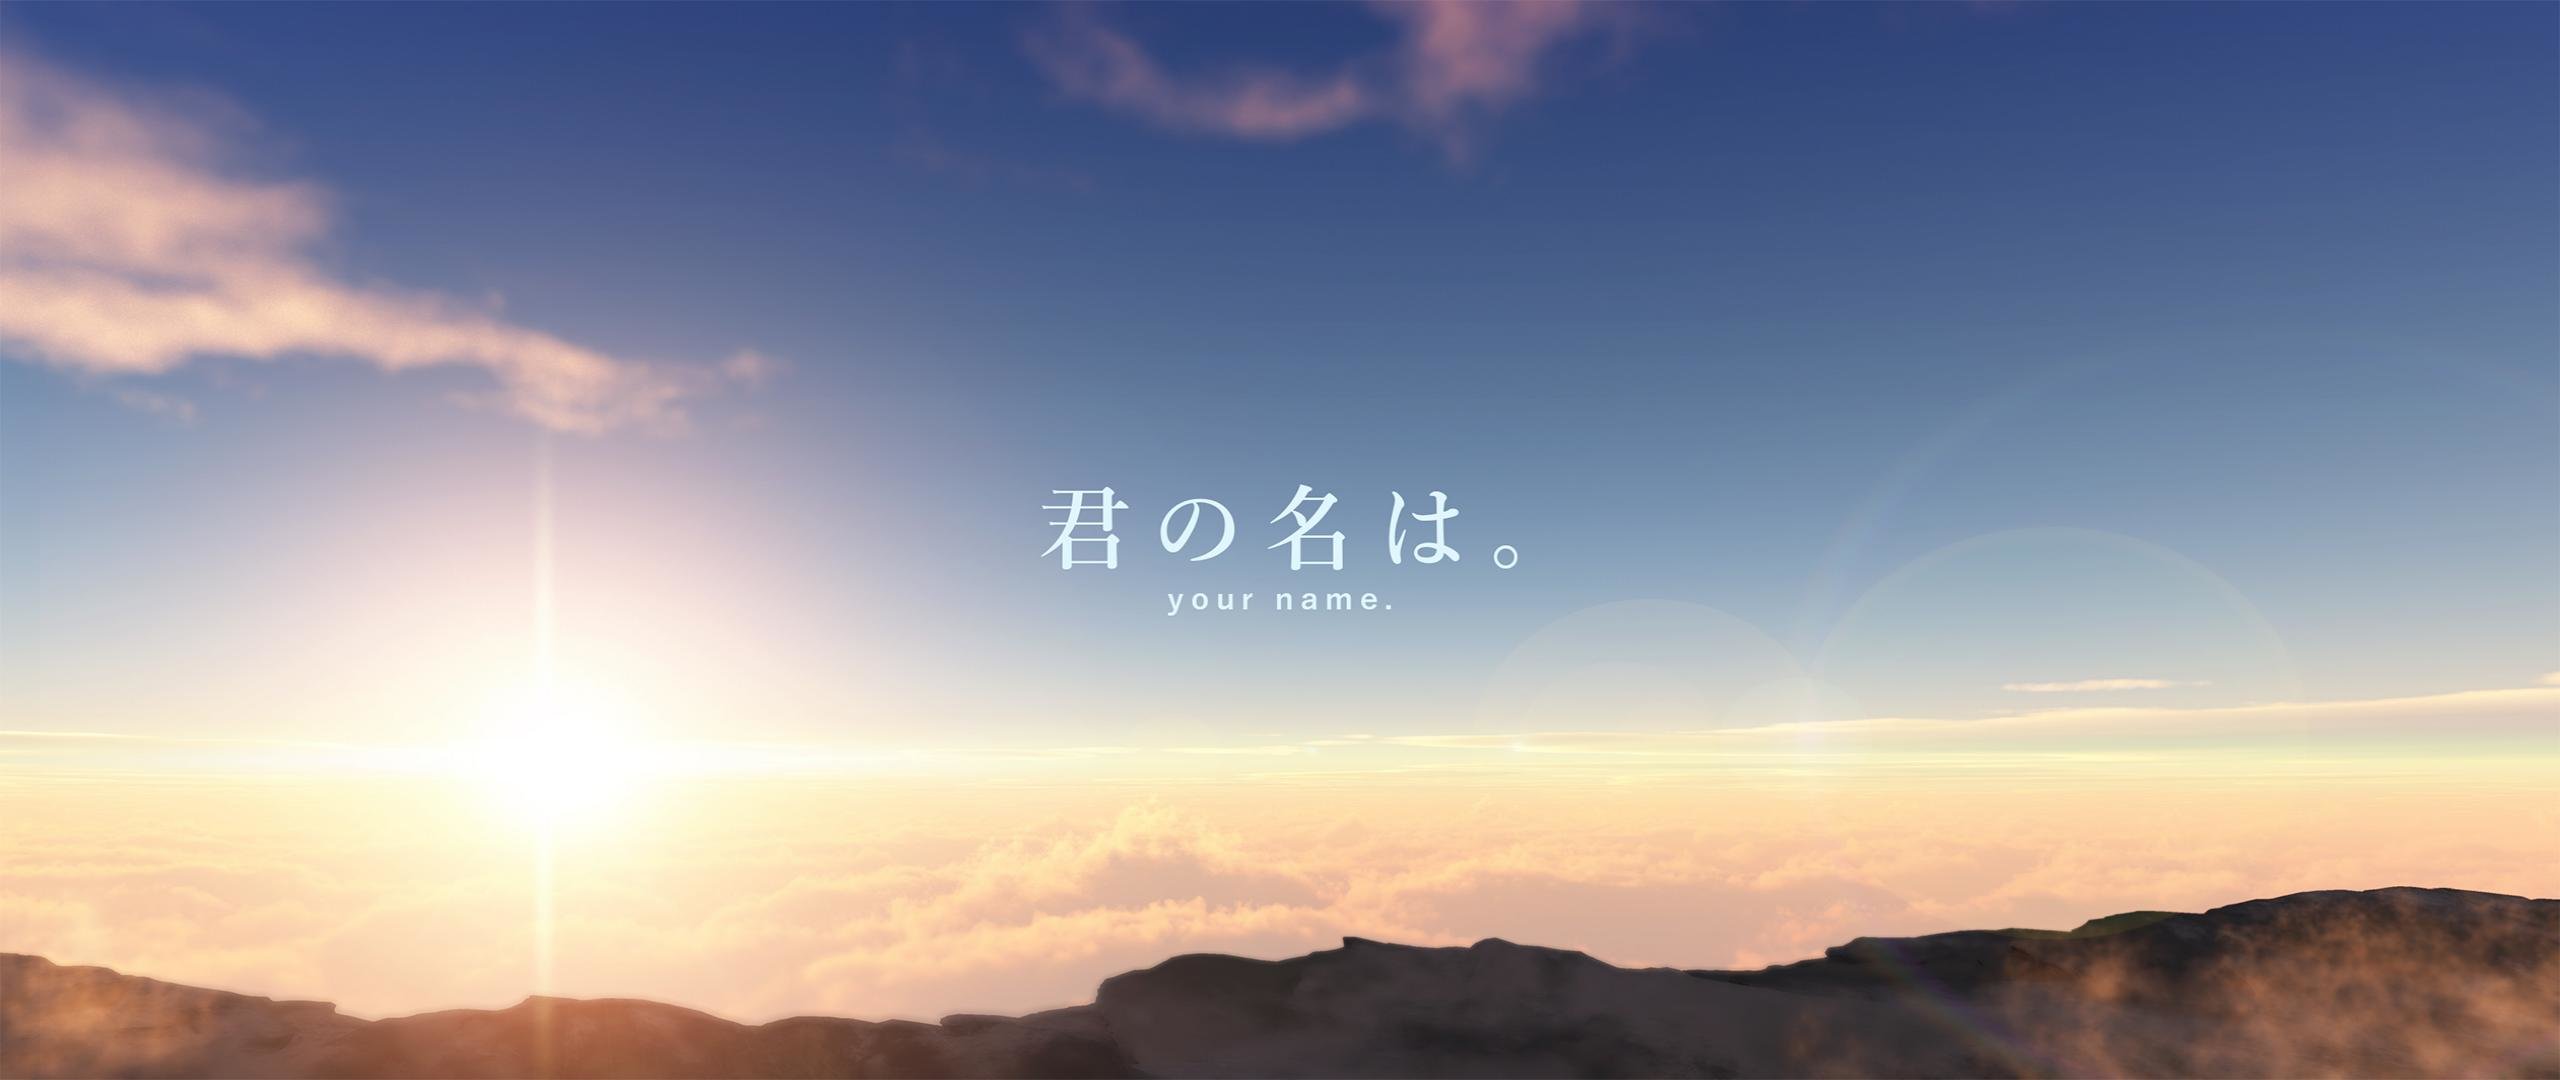 High resolution Your Name hd 2560x1080 background ID:148317 for desktop